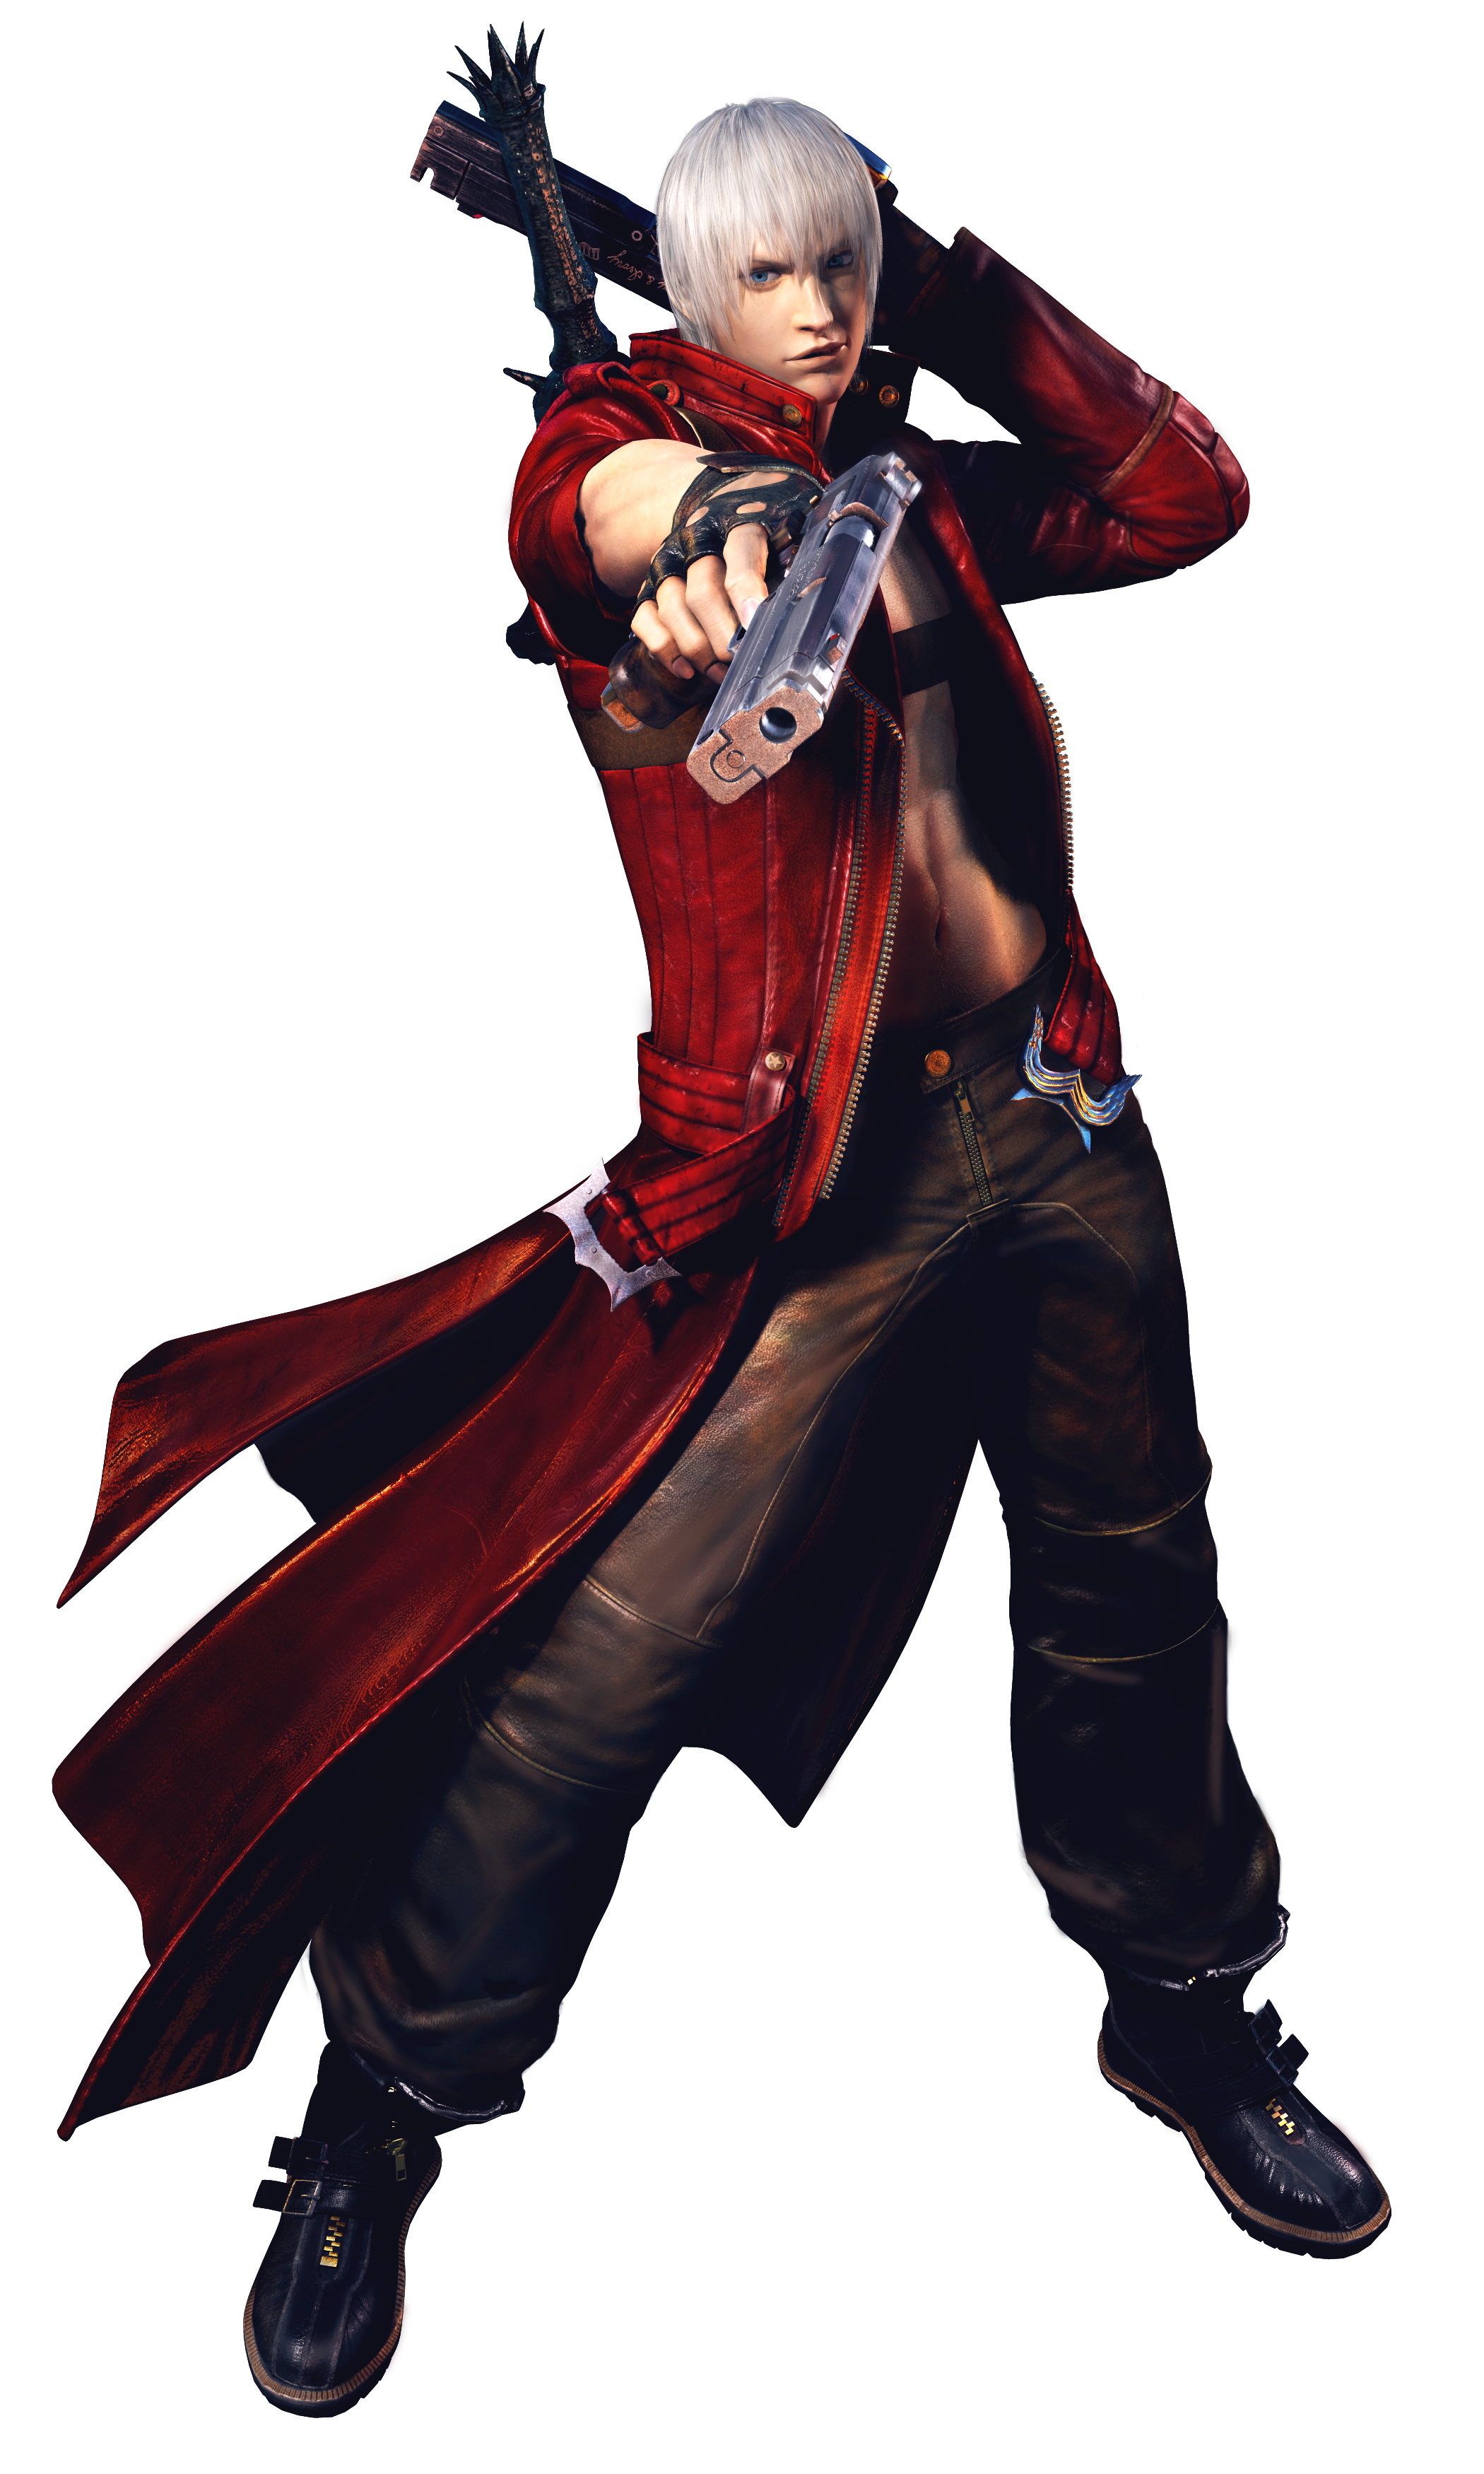 Devil-may-cry.png PlusPng.com